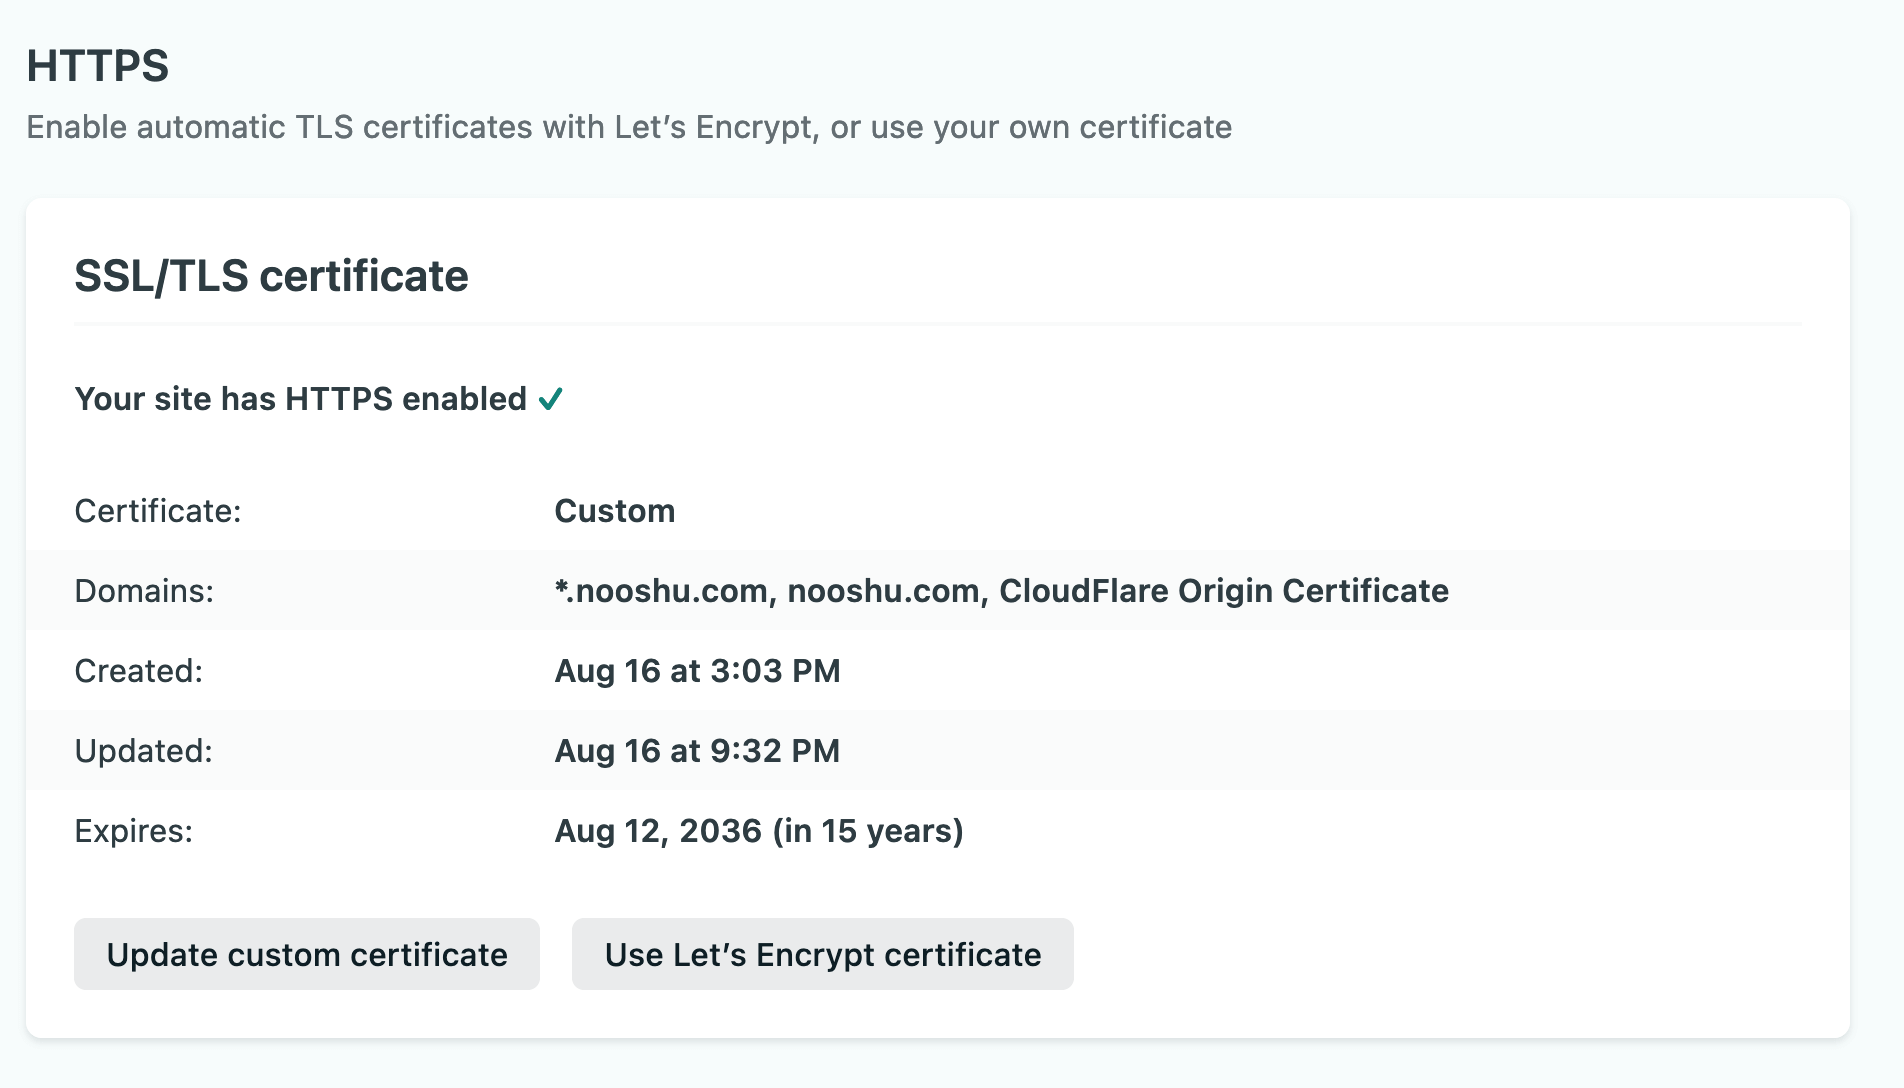 HTTPS settings in Netlify once the certificate is installed.